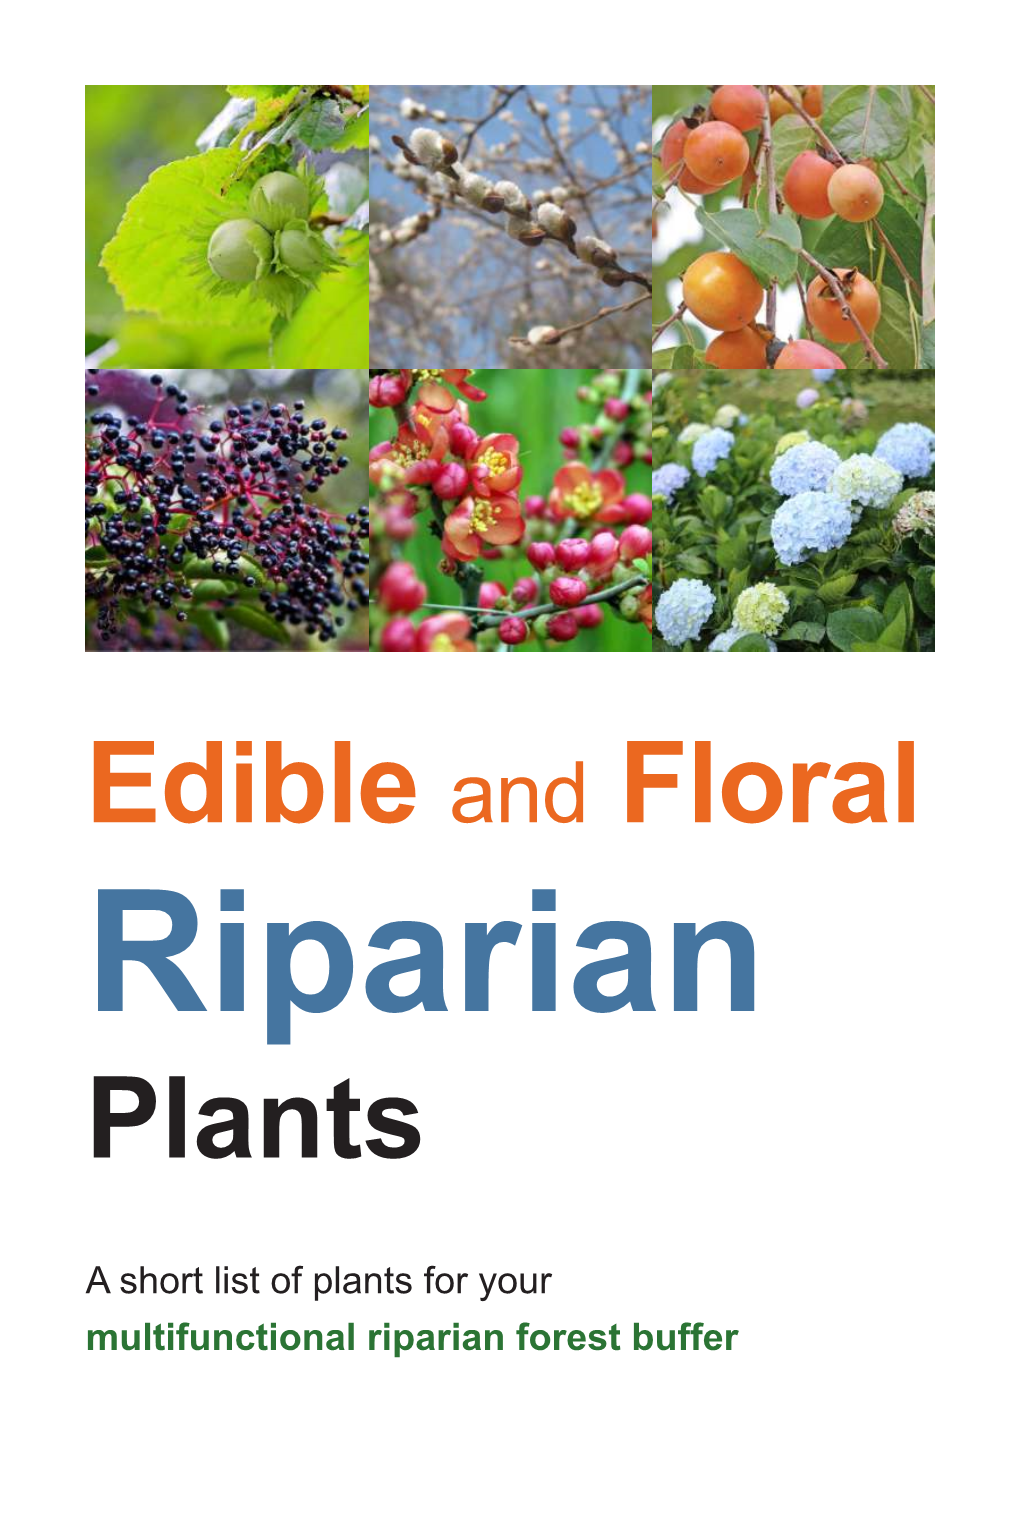 Edible and Floral Riparian Plants